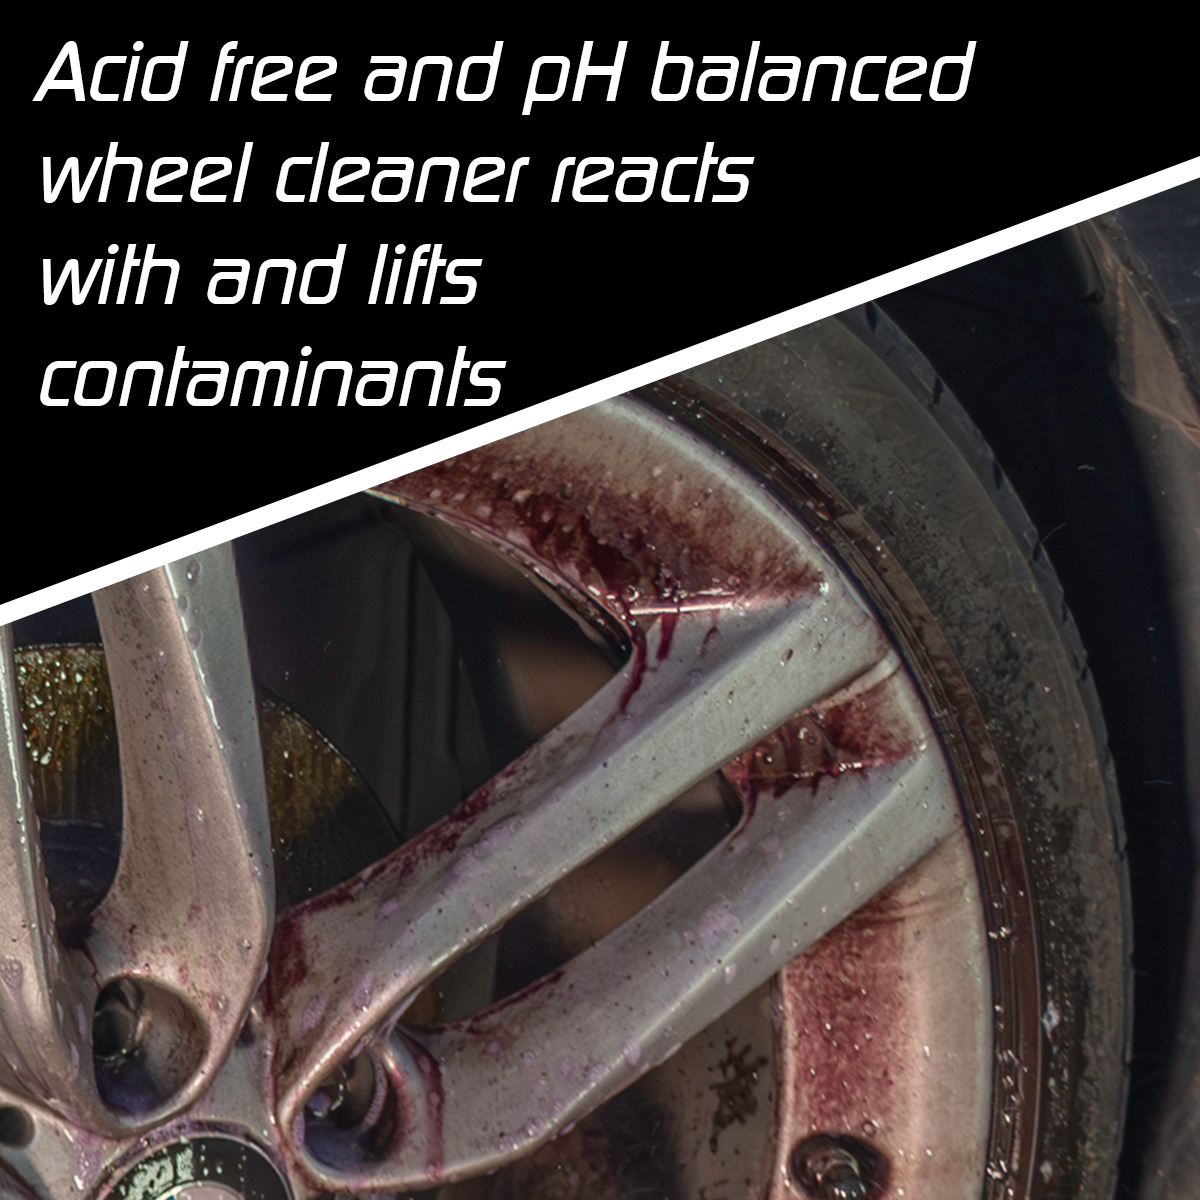 Acid free and pH balanced wheel cleaner reacts with and lifts contaminants